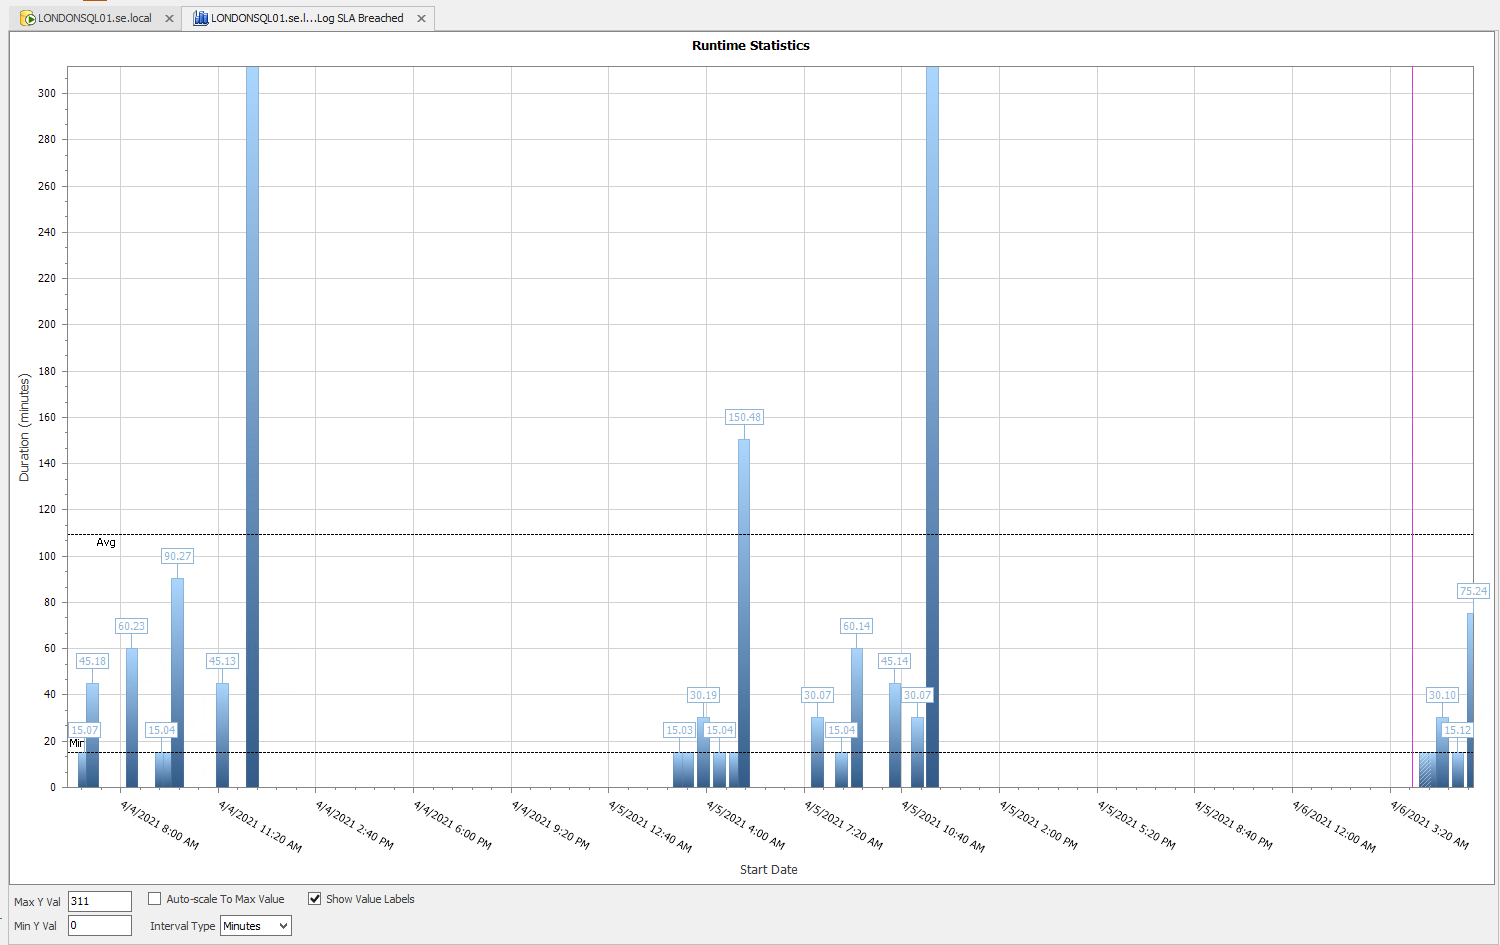 Runtime Stats graph displaying data for a 3 day period from the Event Calendar selection.